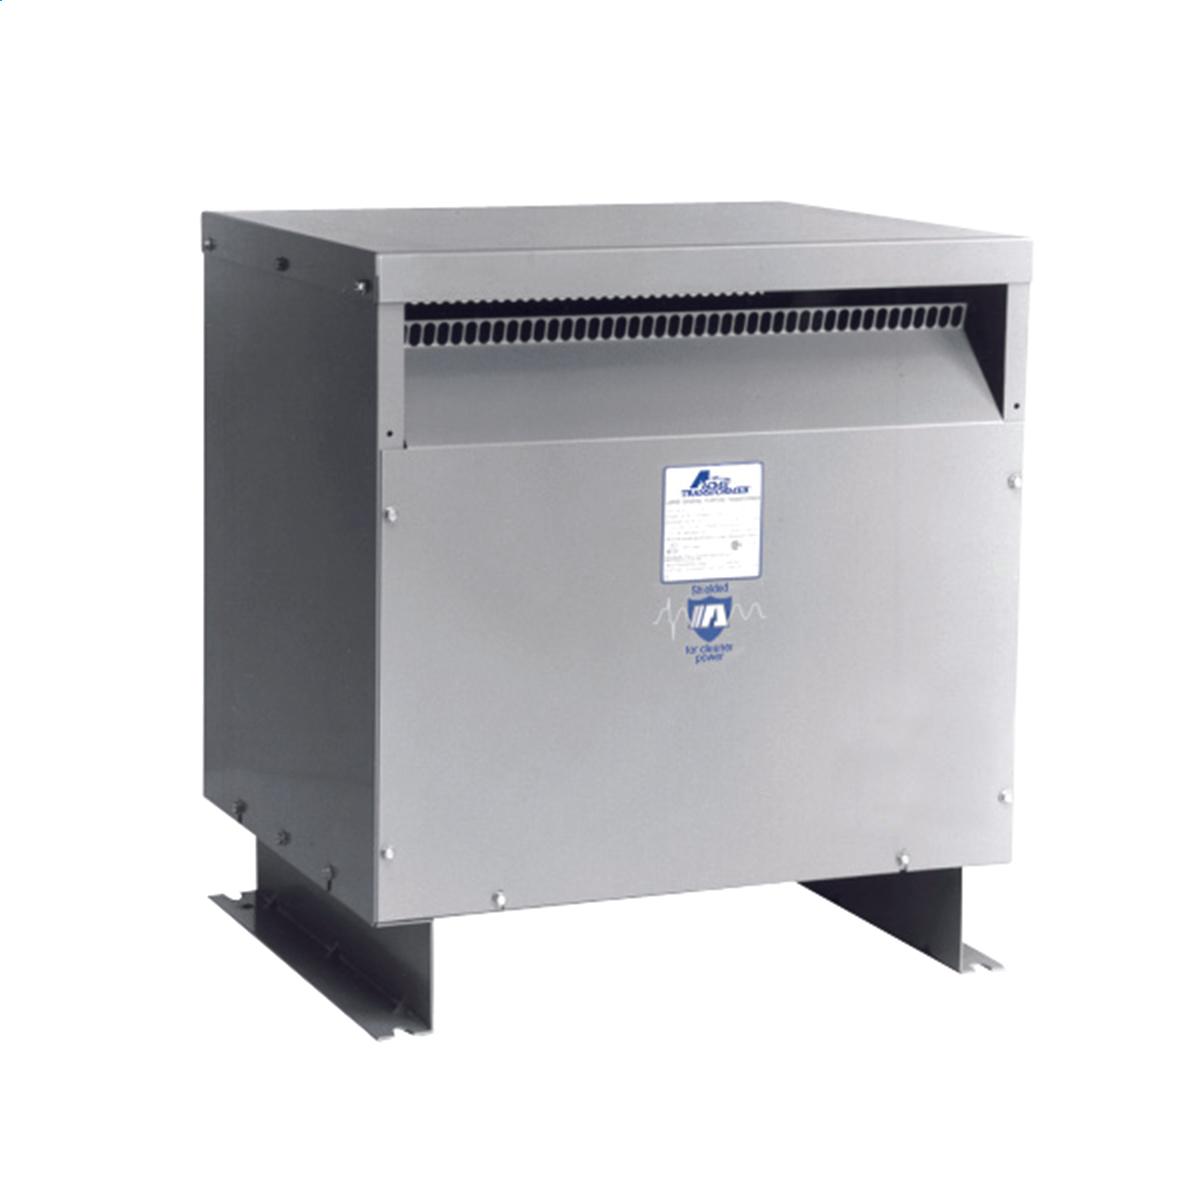 Hubbell WI045K26 Medium Voltage Transformer - Three Phase, 4800Δ - 600ΔV, 45kVA  ; Lower operating cost over Liquid-filled ; No additional fireproofing or venting ; Long life expectancy ; Smaller, lighter easy to maintain